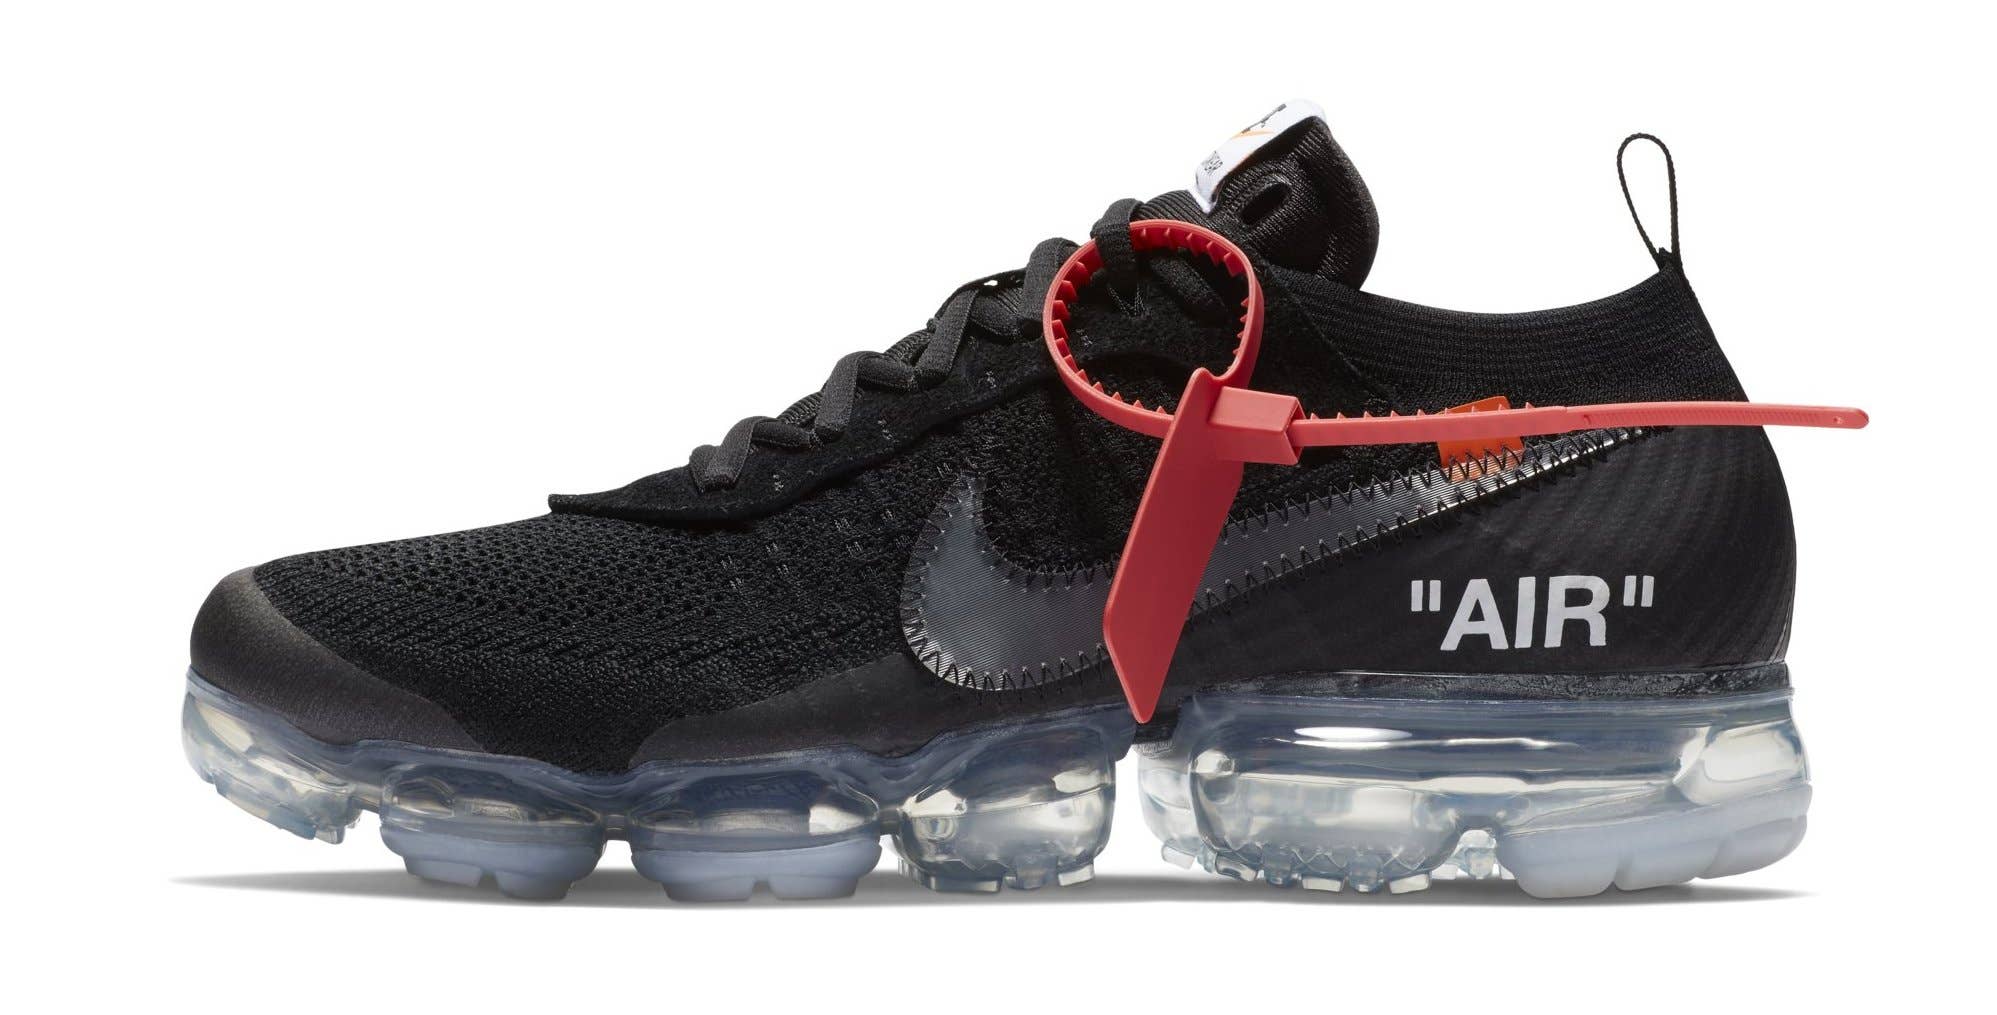 Natur Oprør Asser New Off-White x VaporMax Available on Nike Early Access | Complex